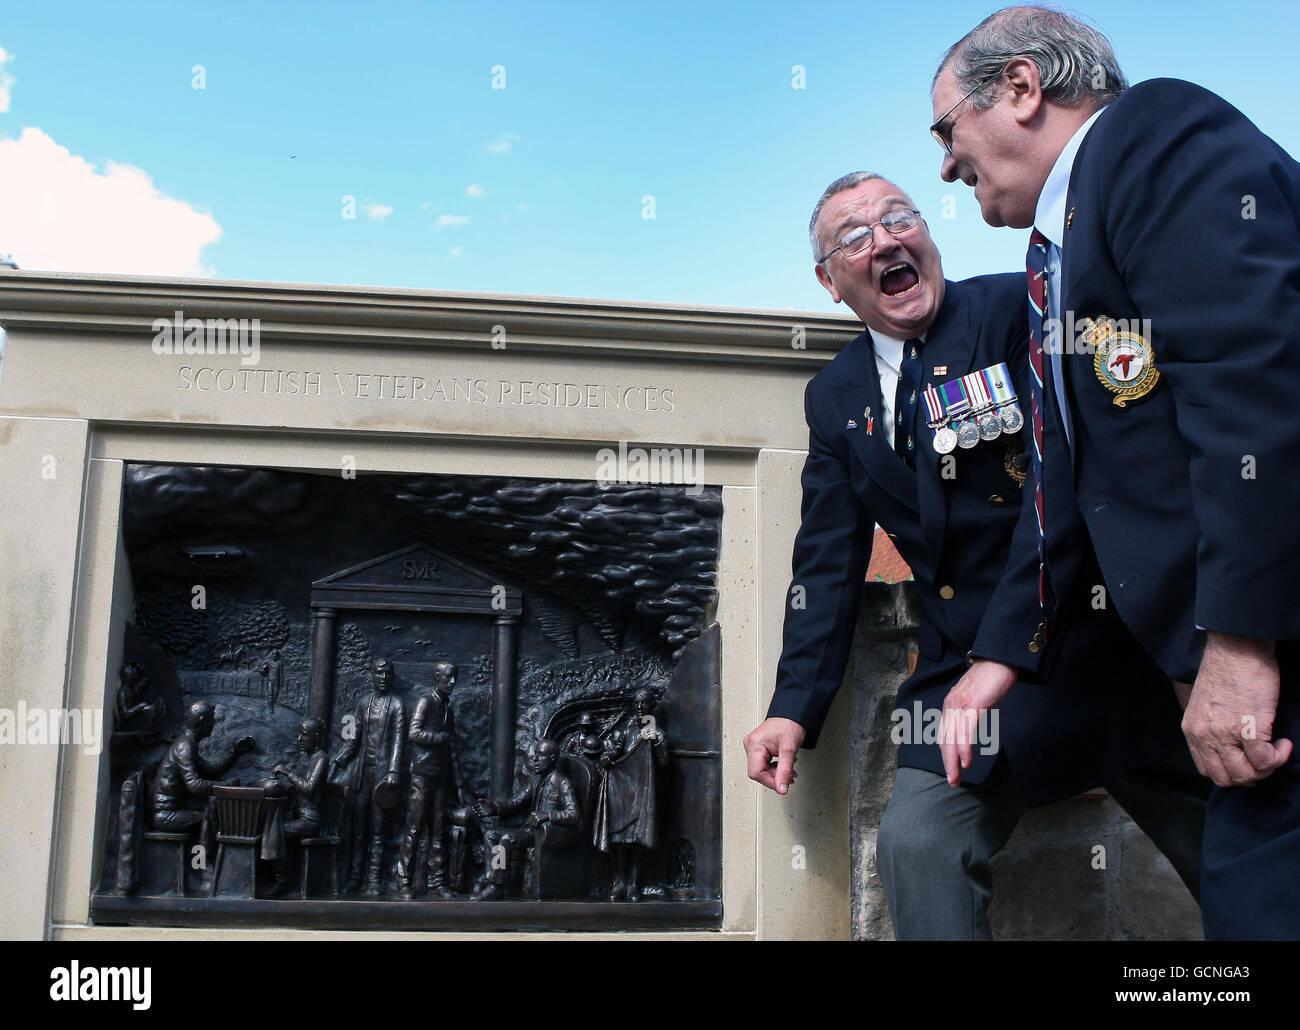 Veterans Andrew Carr RAF (right) and Kenny Kerr Royal Marines look at a new bronze sculpture to mark 100 years of the veterans residence in Edinburgh. Stock Photo